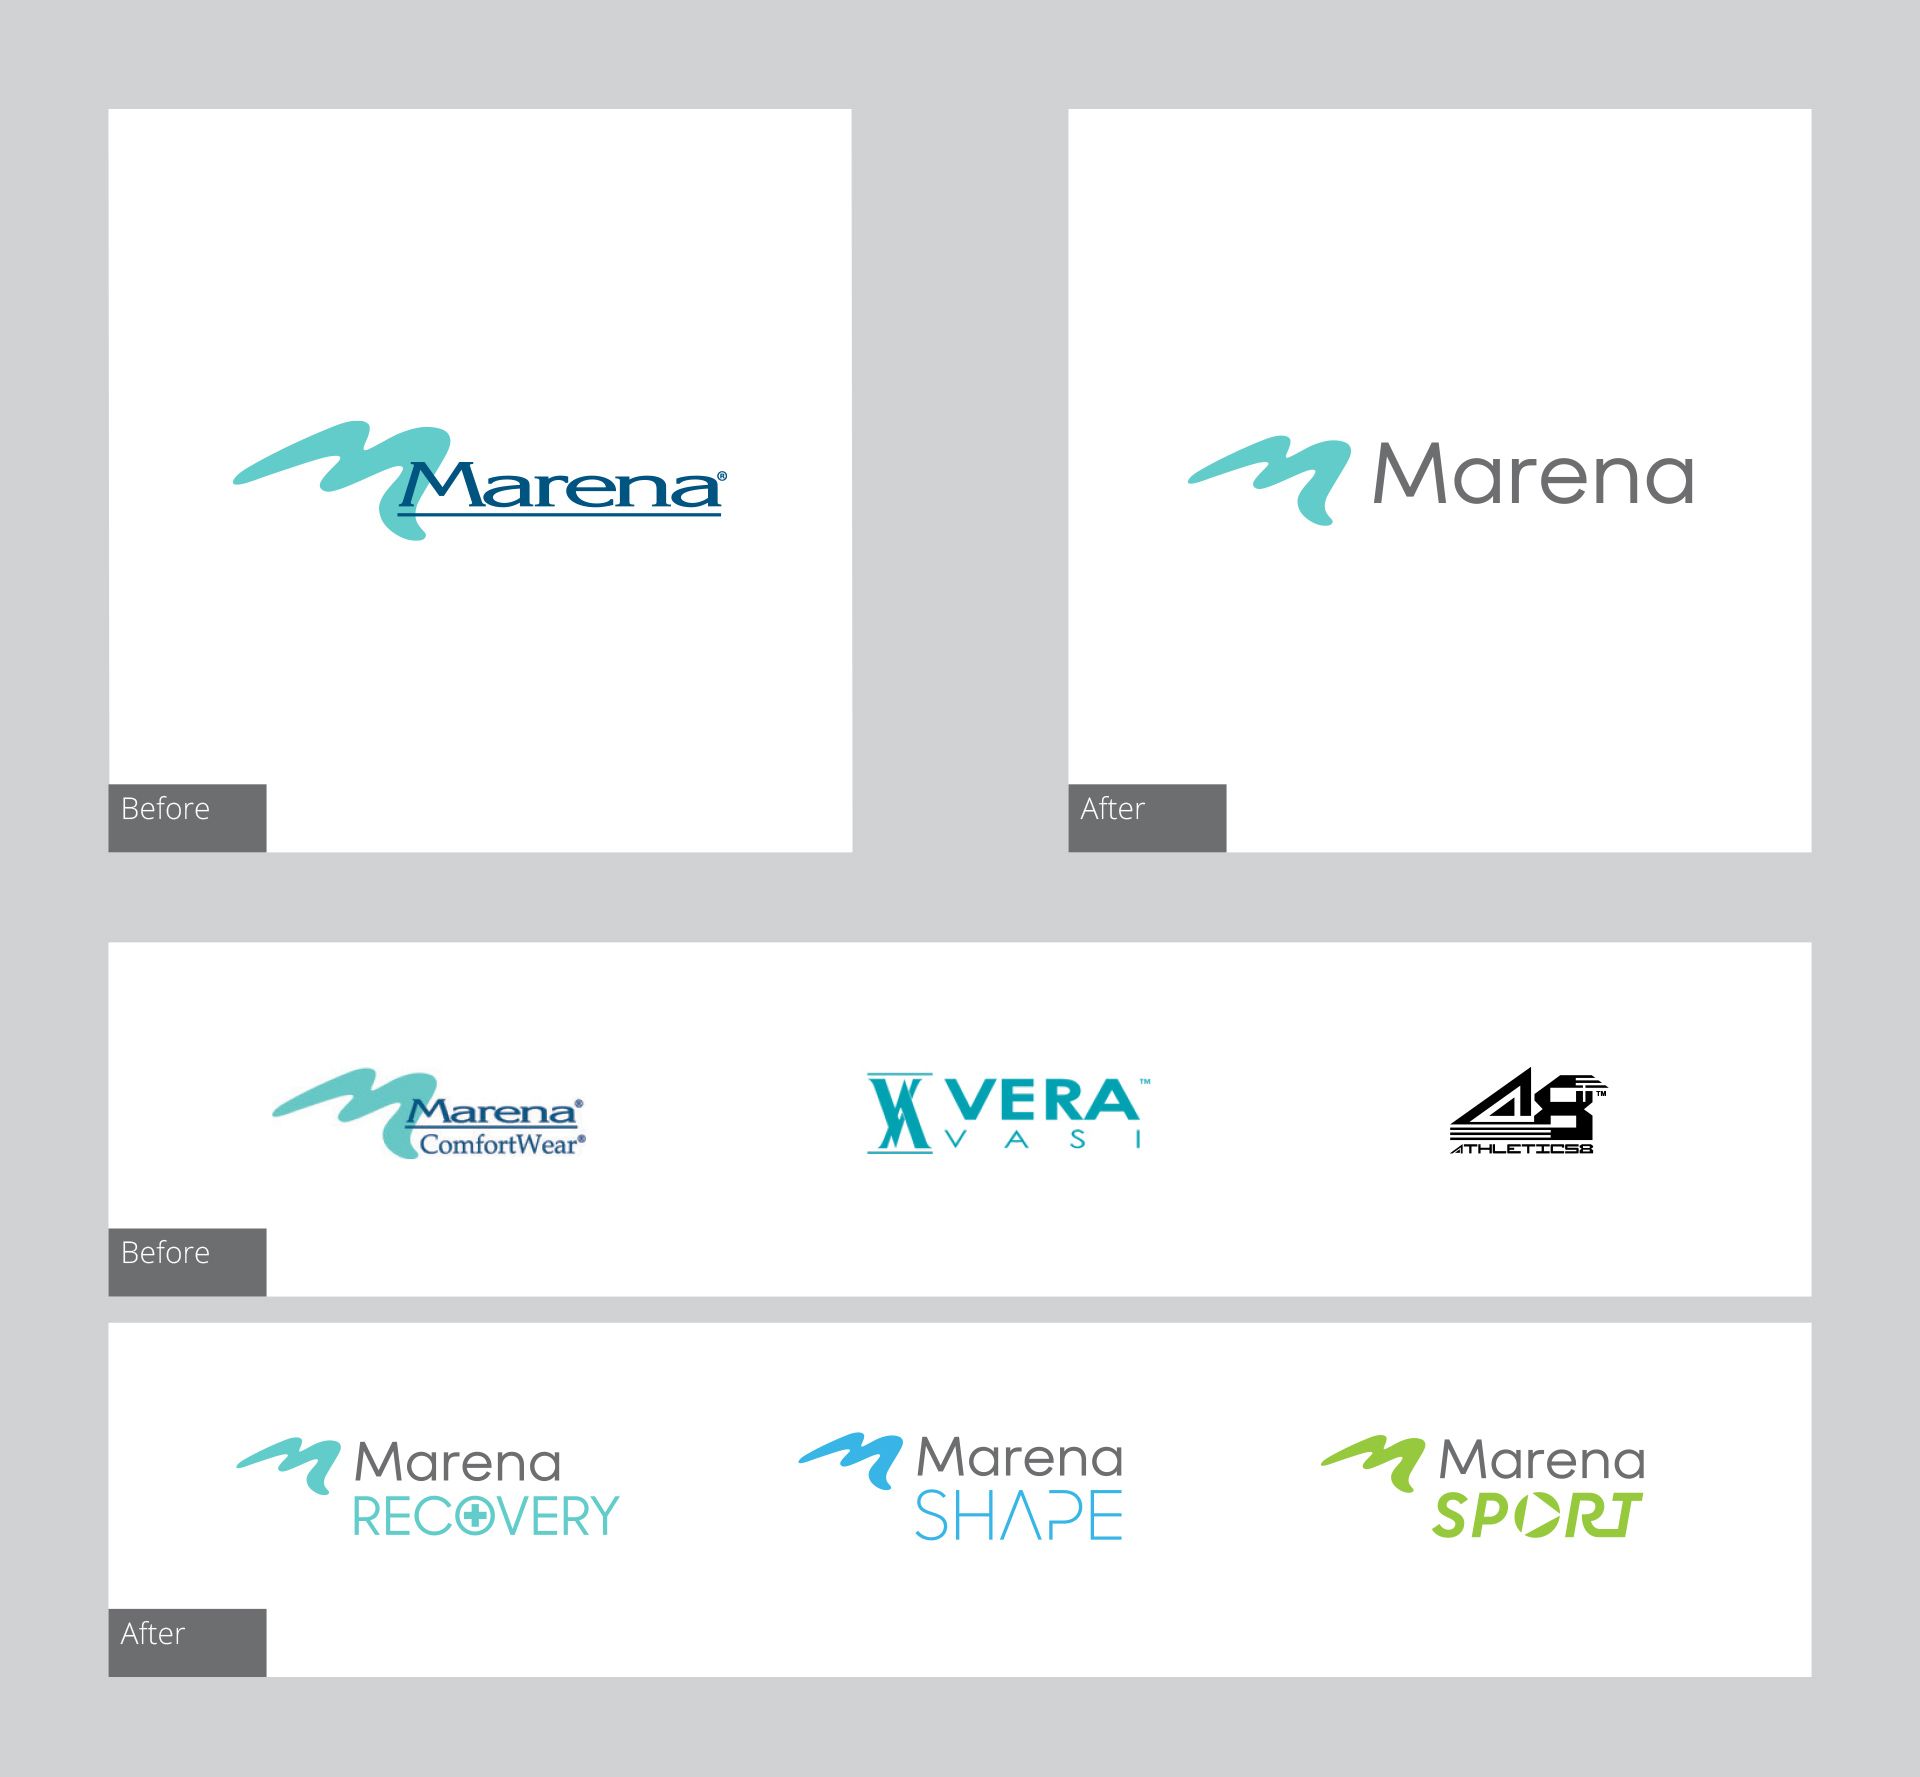 Comparison of the previous Marena logo and the new one